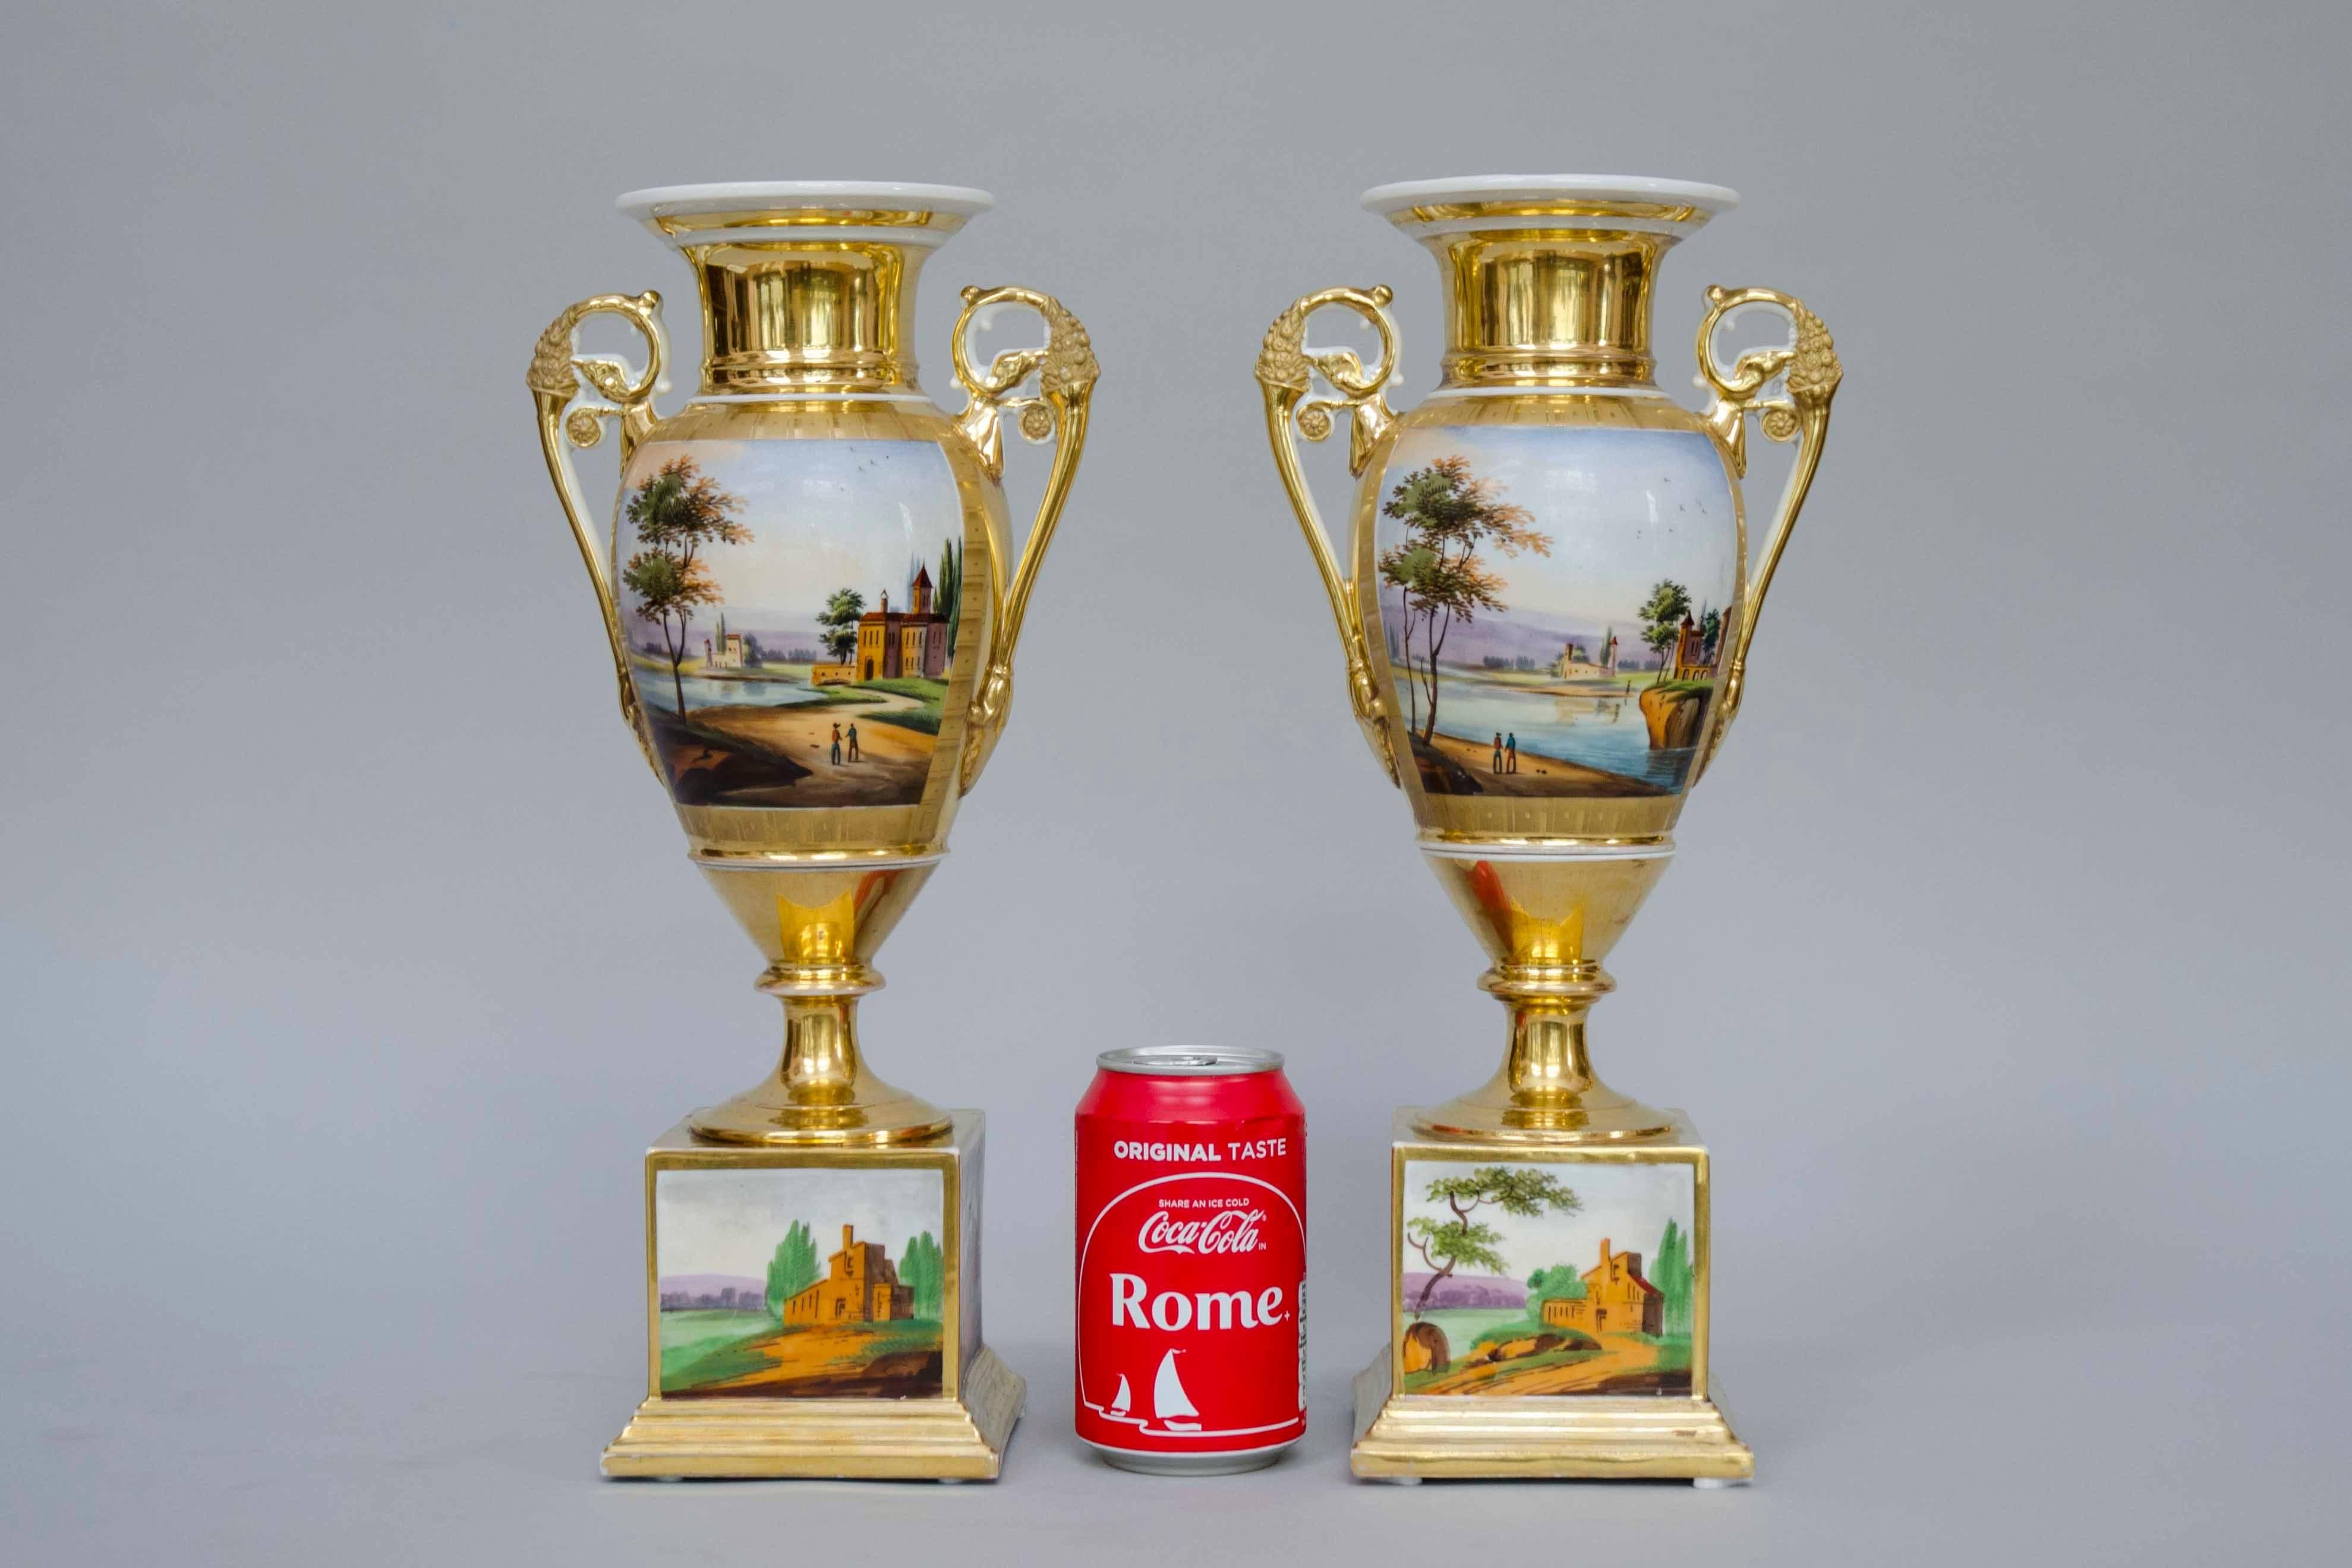 19th Century Squared Based Egg Shaped Vases with Italian Landscapes, Brussels For Sale 4